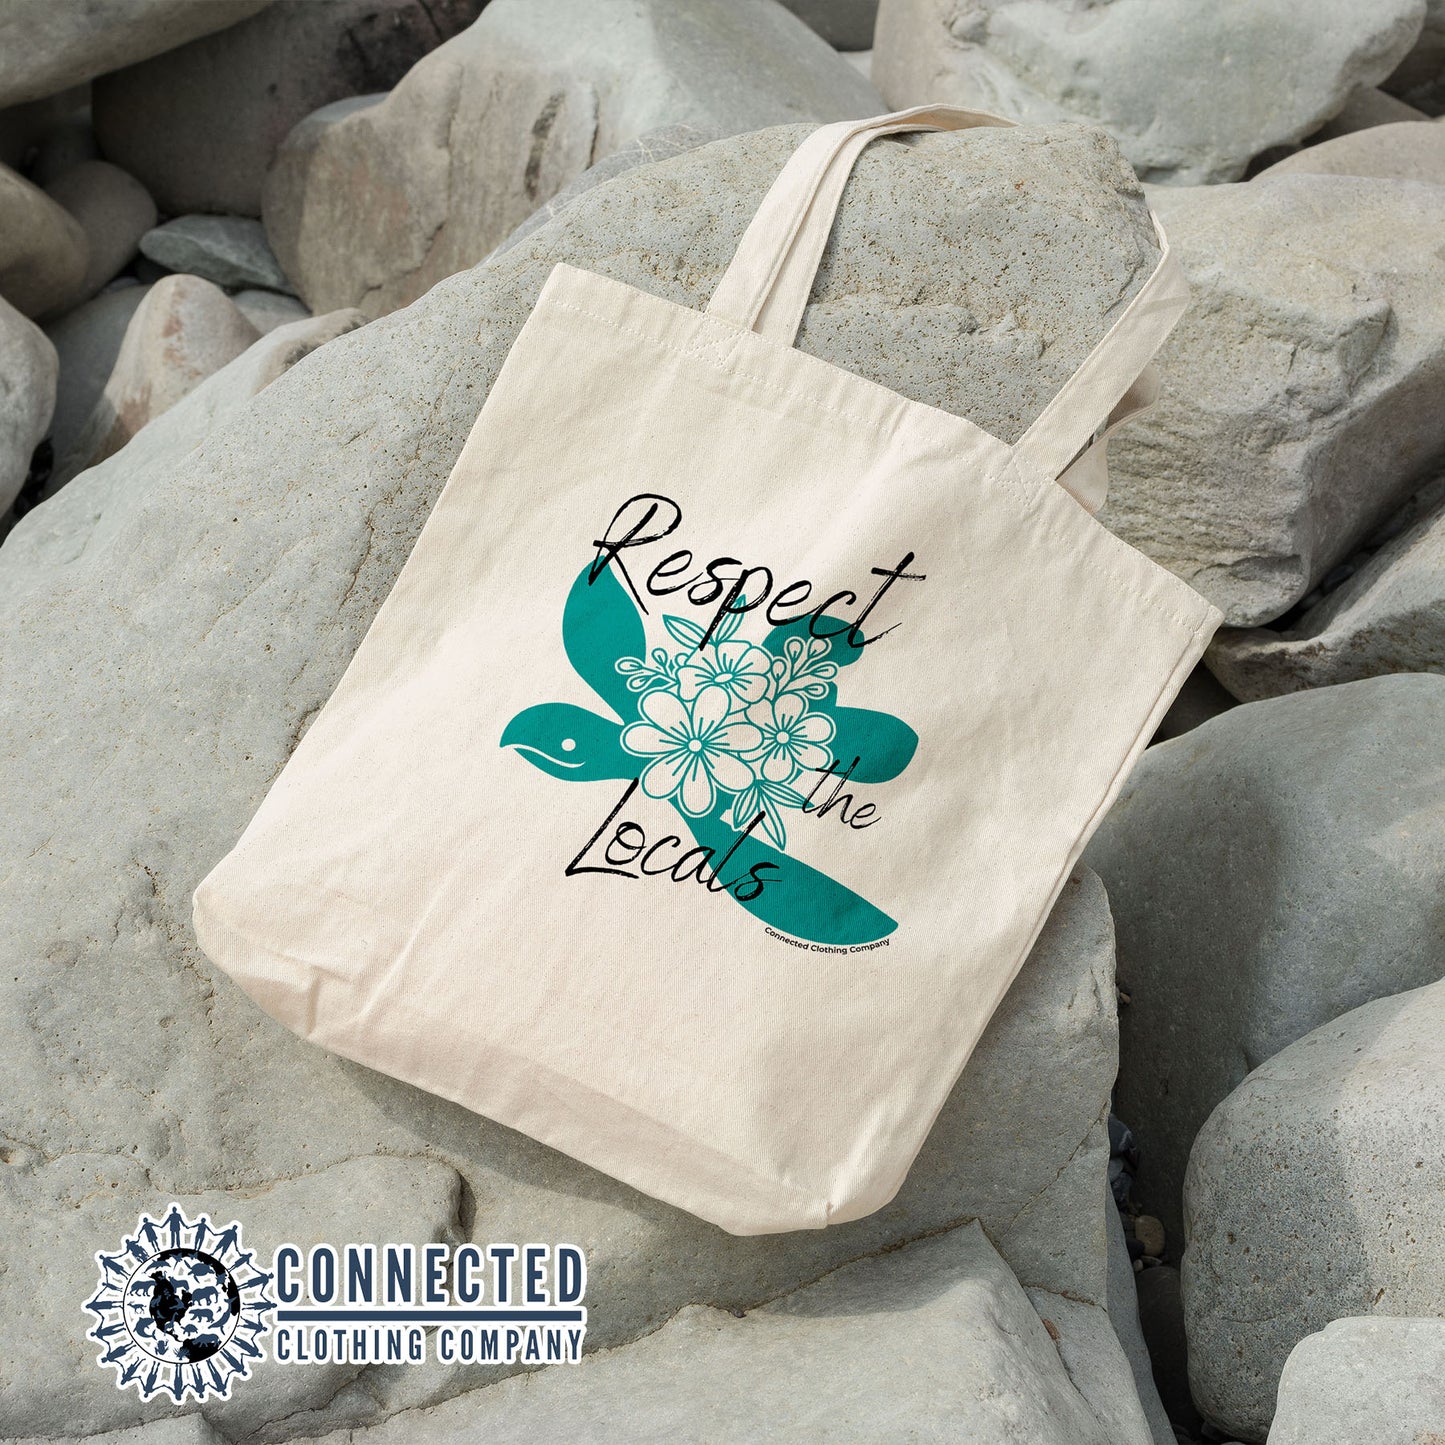 Respect The Locals Sea Turtle Tote - Connected Clothing Company - 10% of proceeds donated to sea turtle conservation